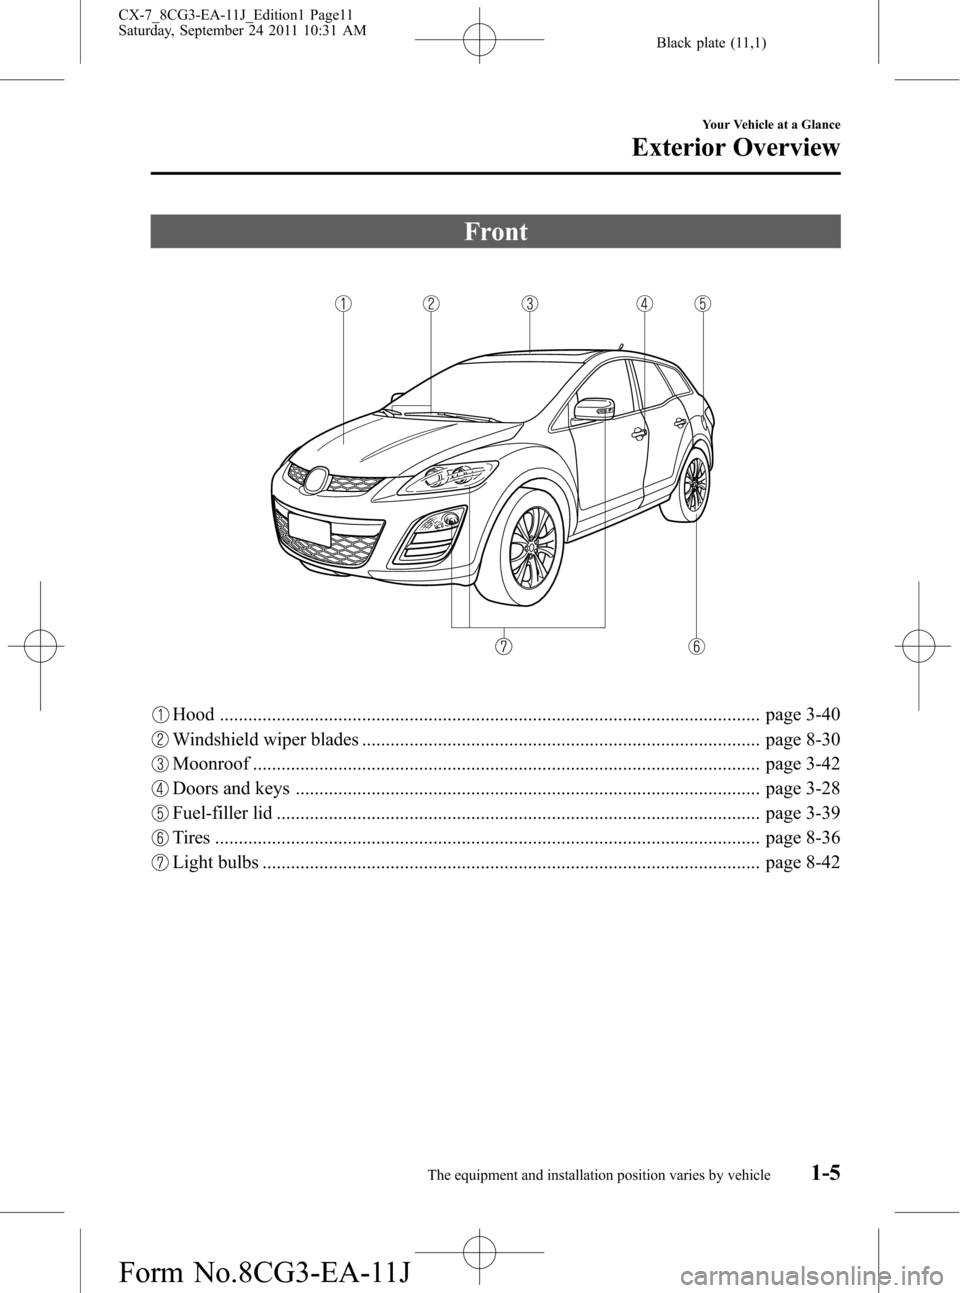 MAZDA MODEL CX-7 2012  Owners Manual (in English) Black plate (11,1)
Front
Hood .................................................................................................................. page 3-40
Windshield wiper blades .....................